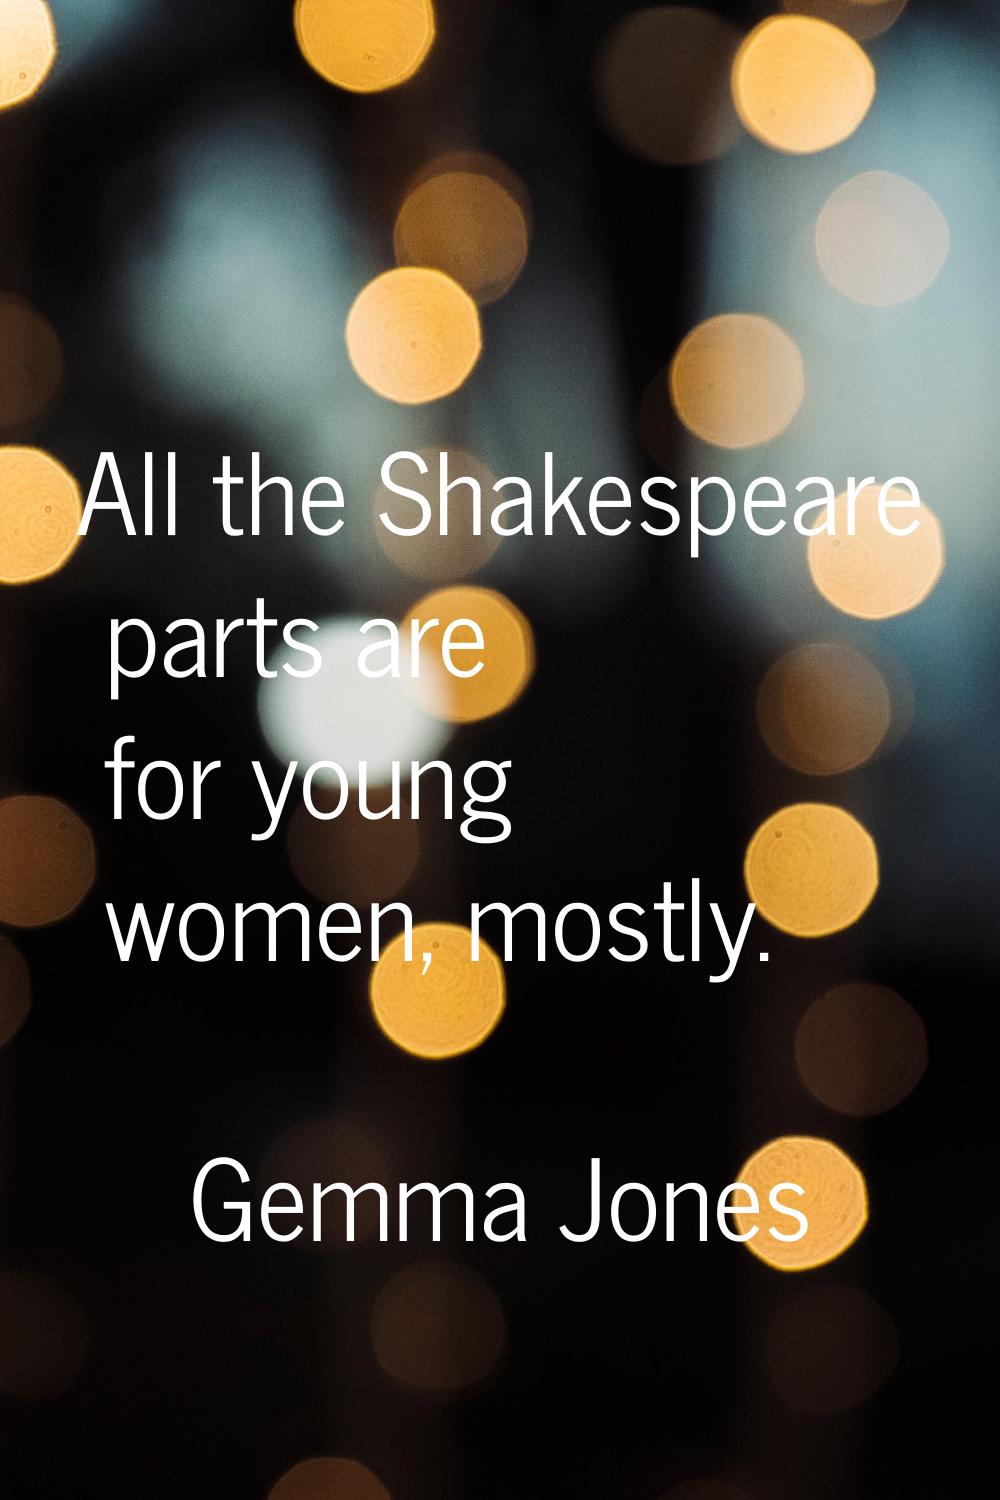 All the Shakespeare parts are for young women, mostly.